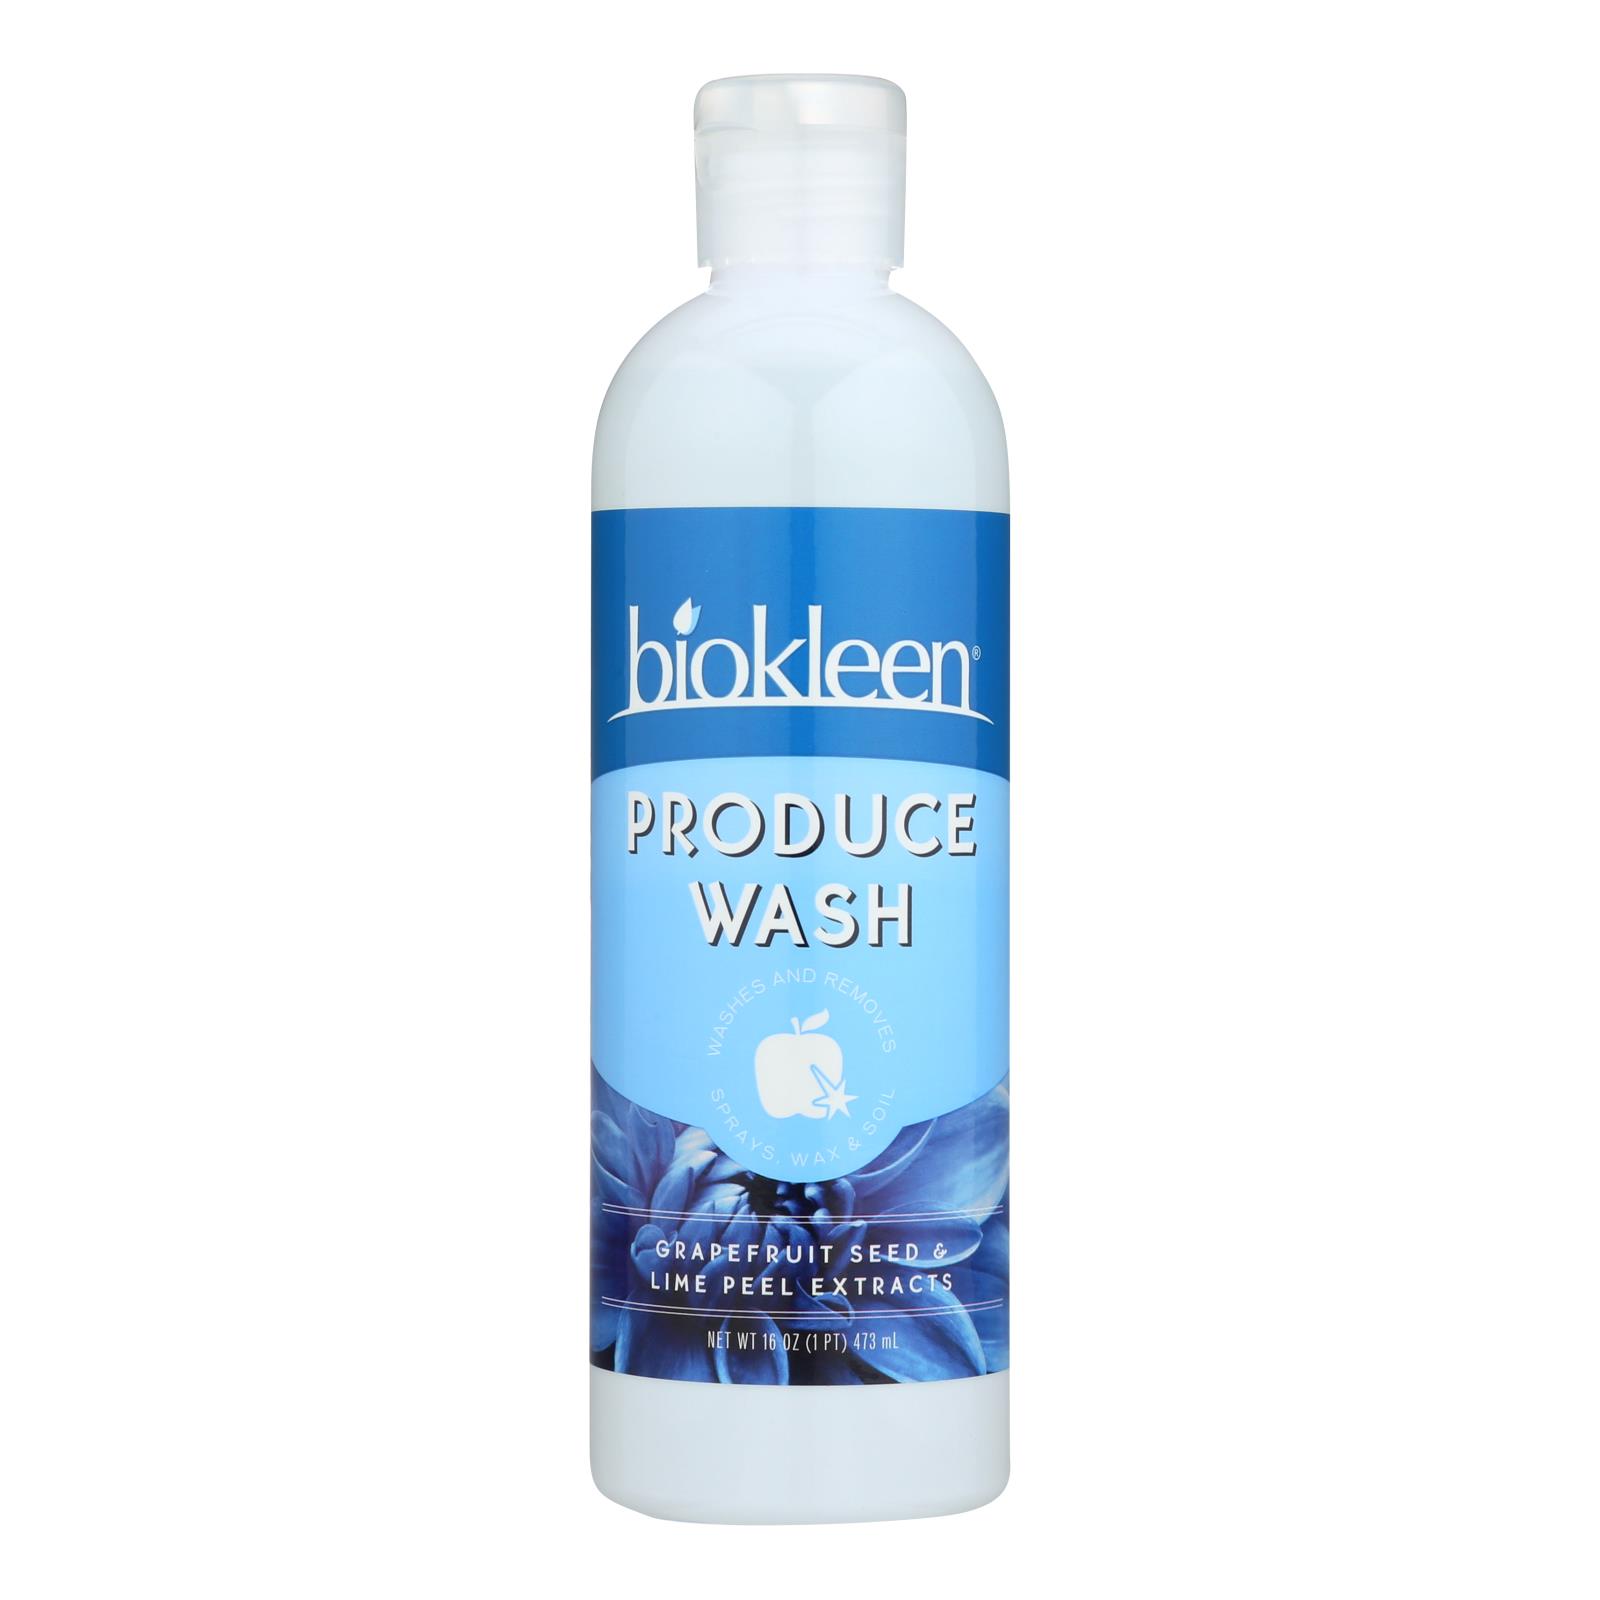 Biokleen - Produce Wash Concentrate - 6개 묶음상품-16 FZ